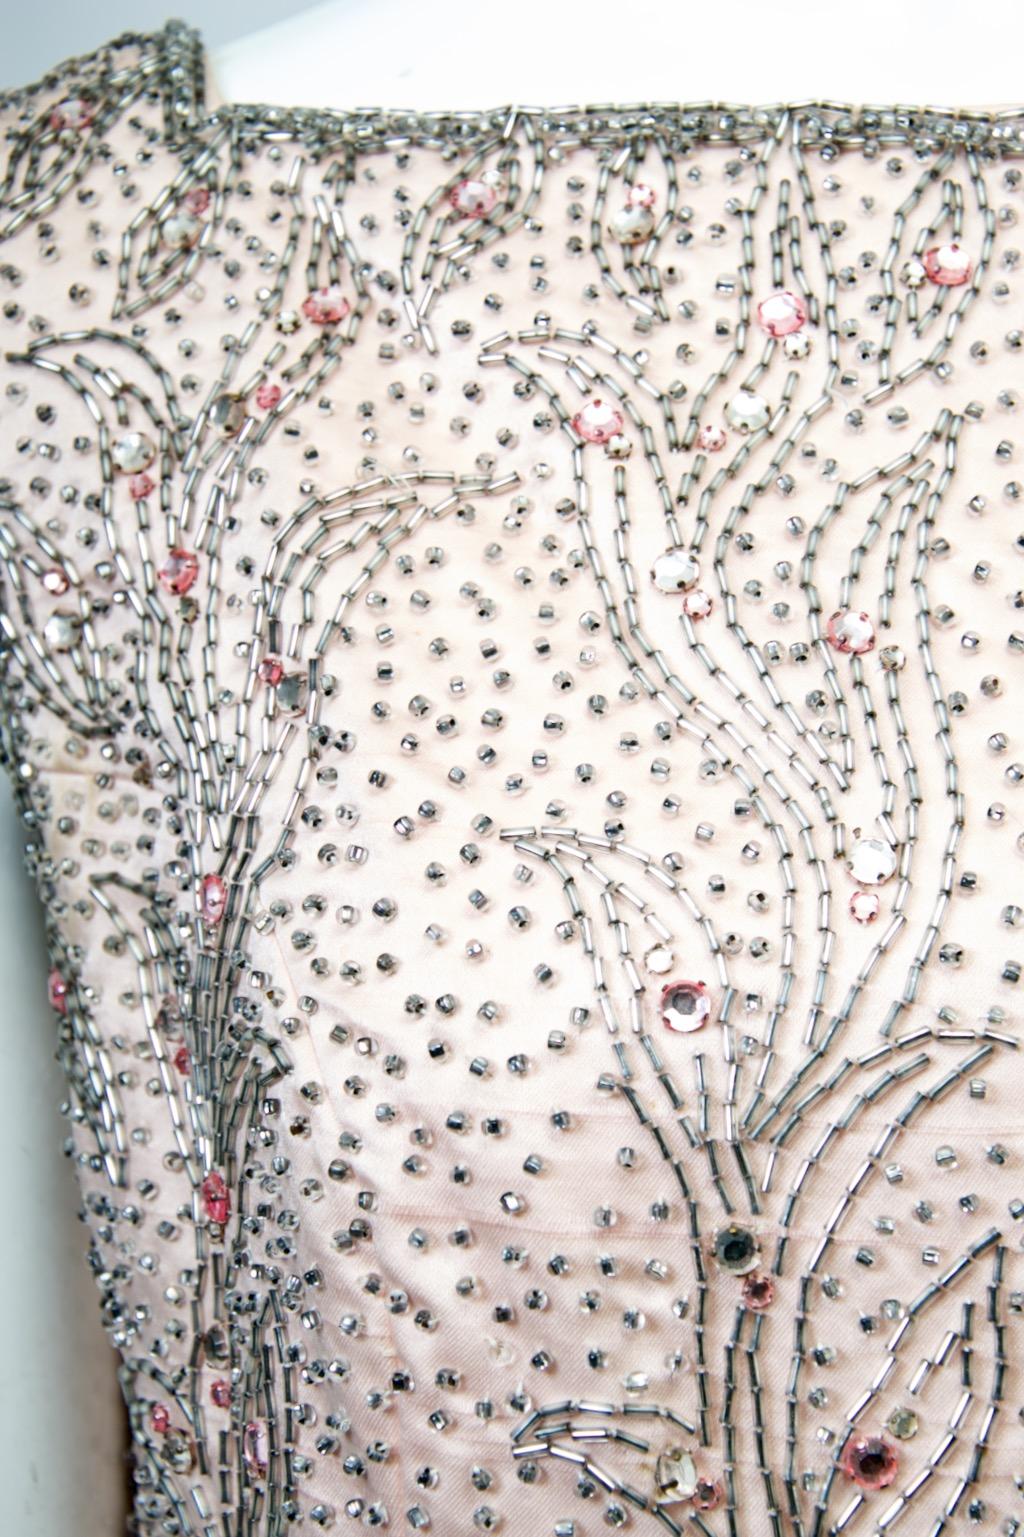 Malcom Starr 1960s Pink Beaded Dress In Good Condition For Sale In Alford, MA